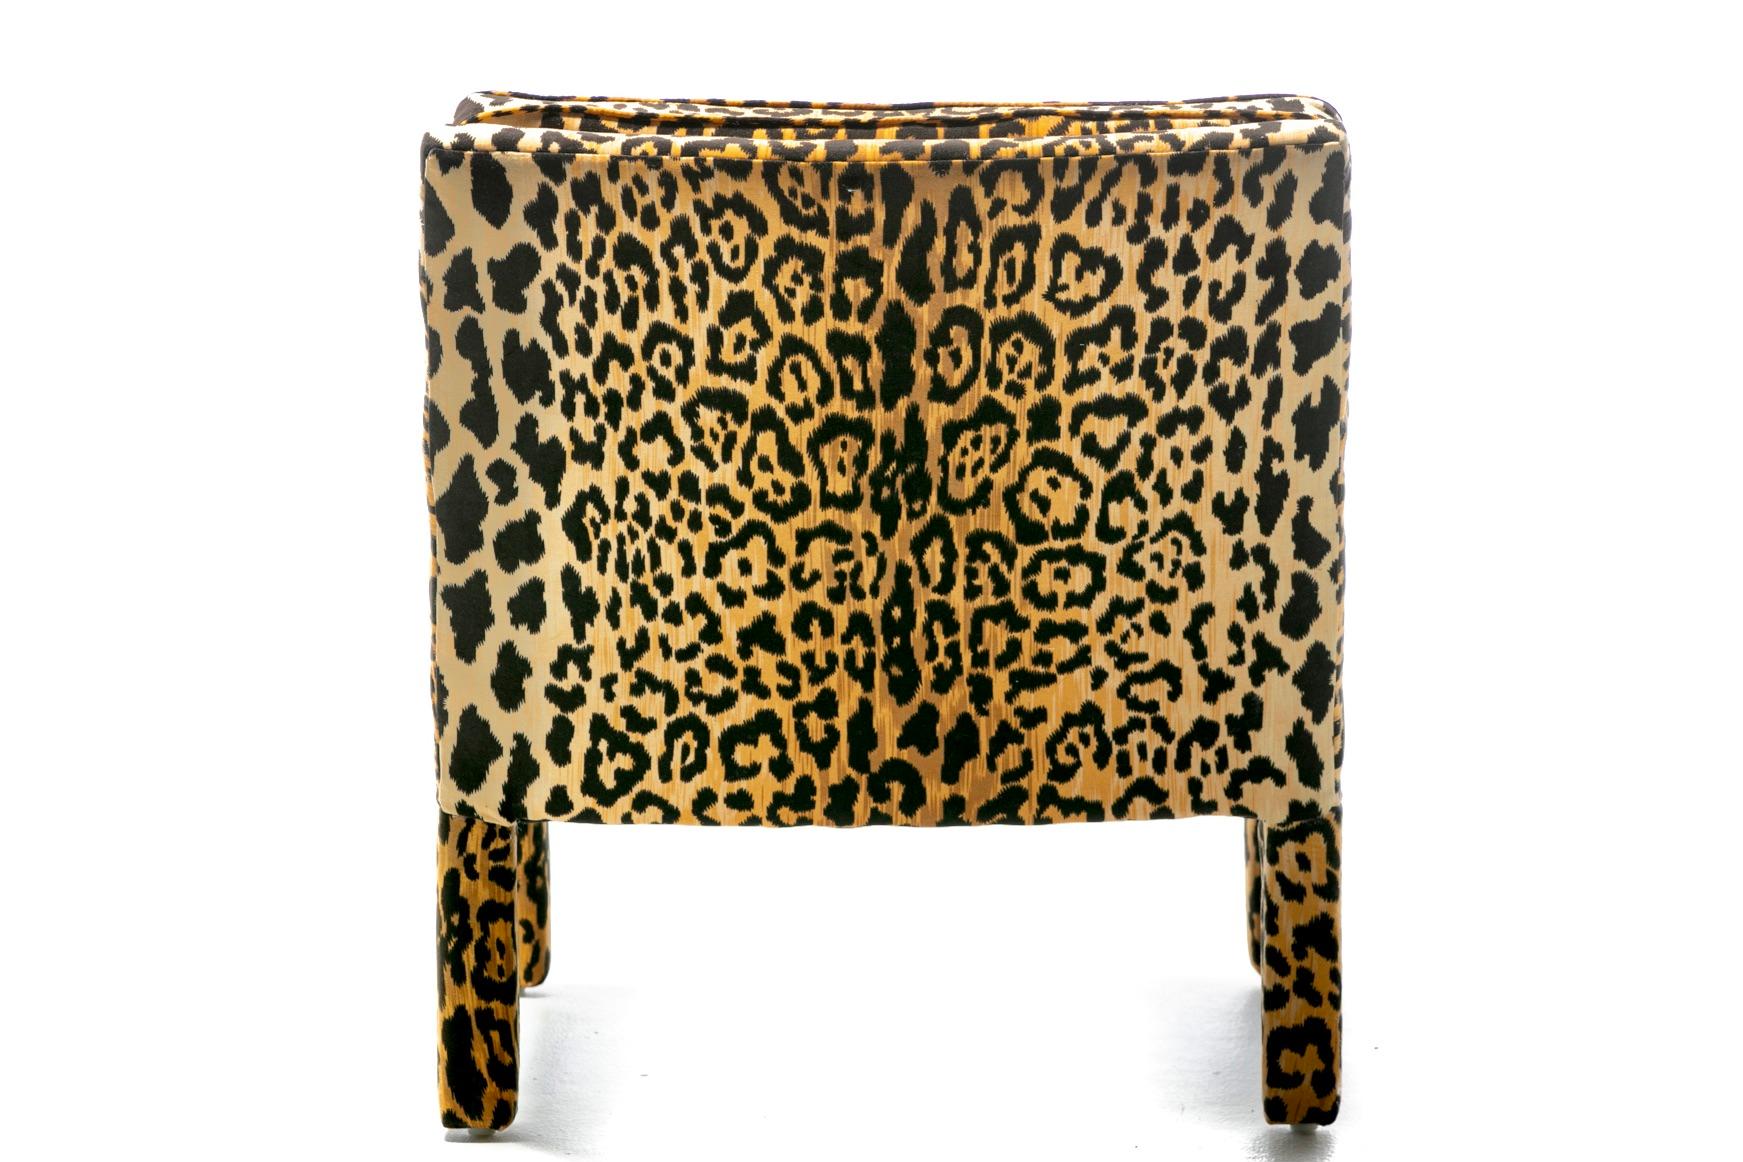  Milo Baughman Style Mid Century Parsons Chair in Leopard Velvet c. 1970 In Good Condition For Sale In Saint Louis, MO